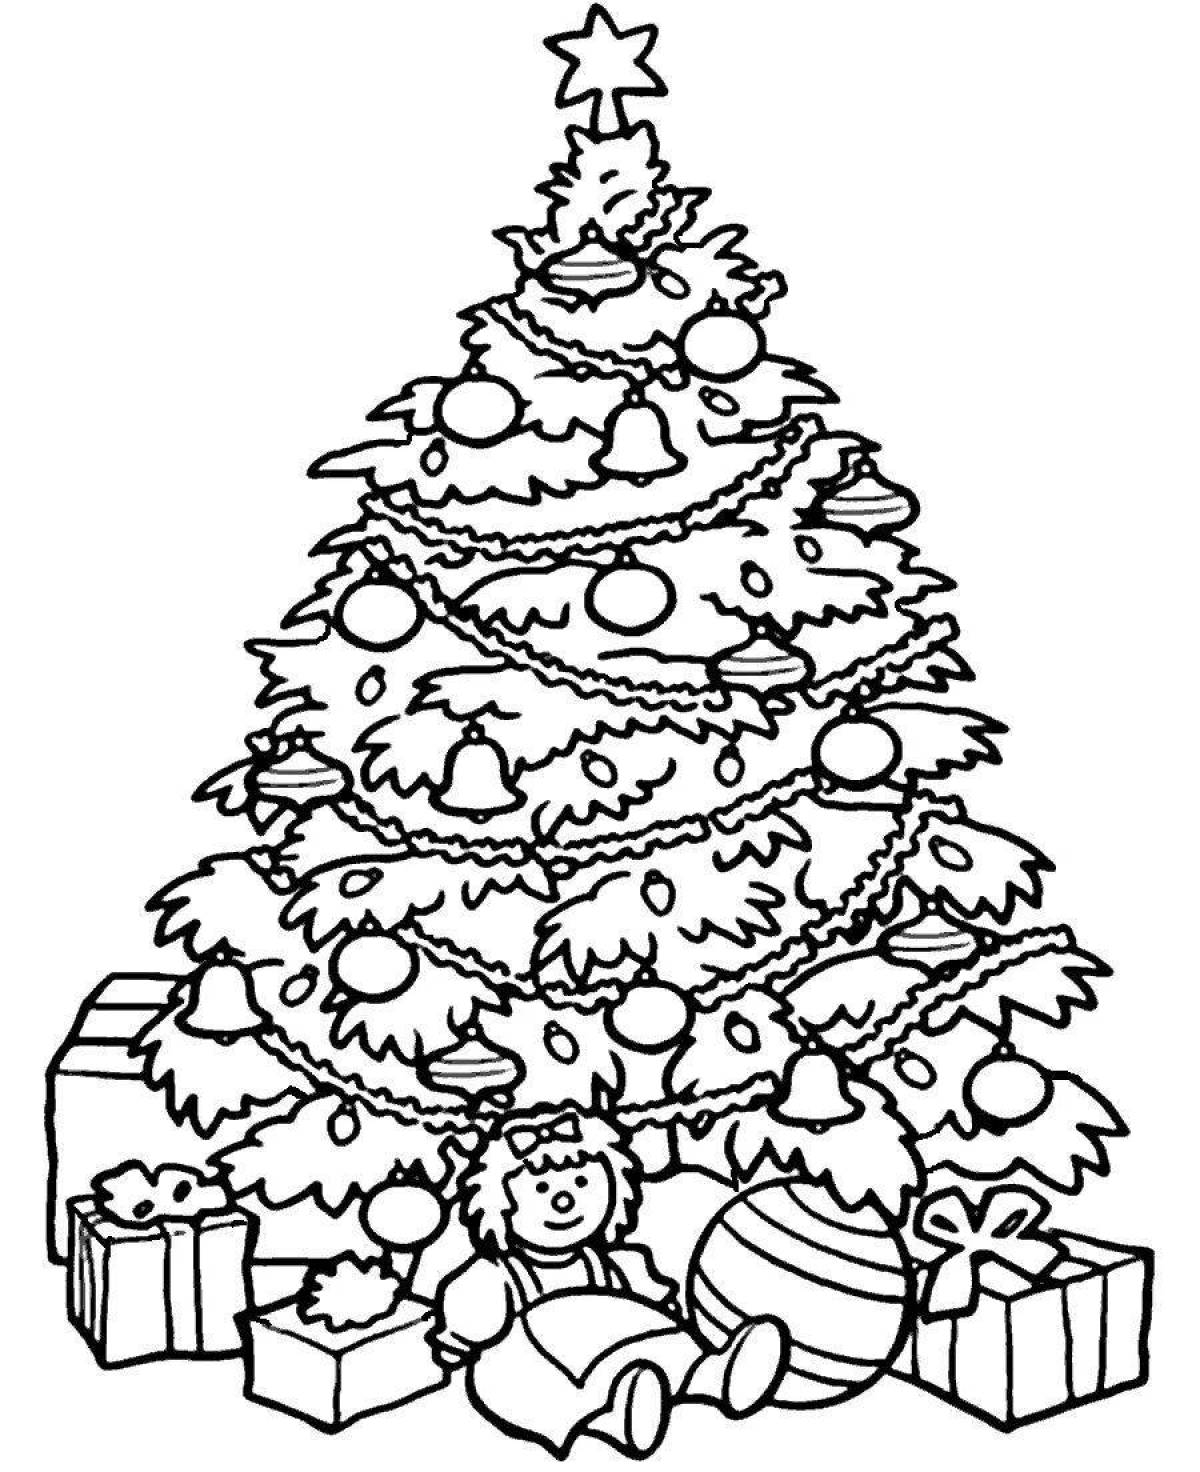 Great big tree coloring book for kids